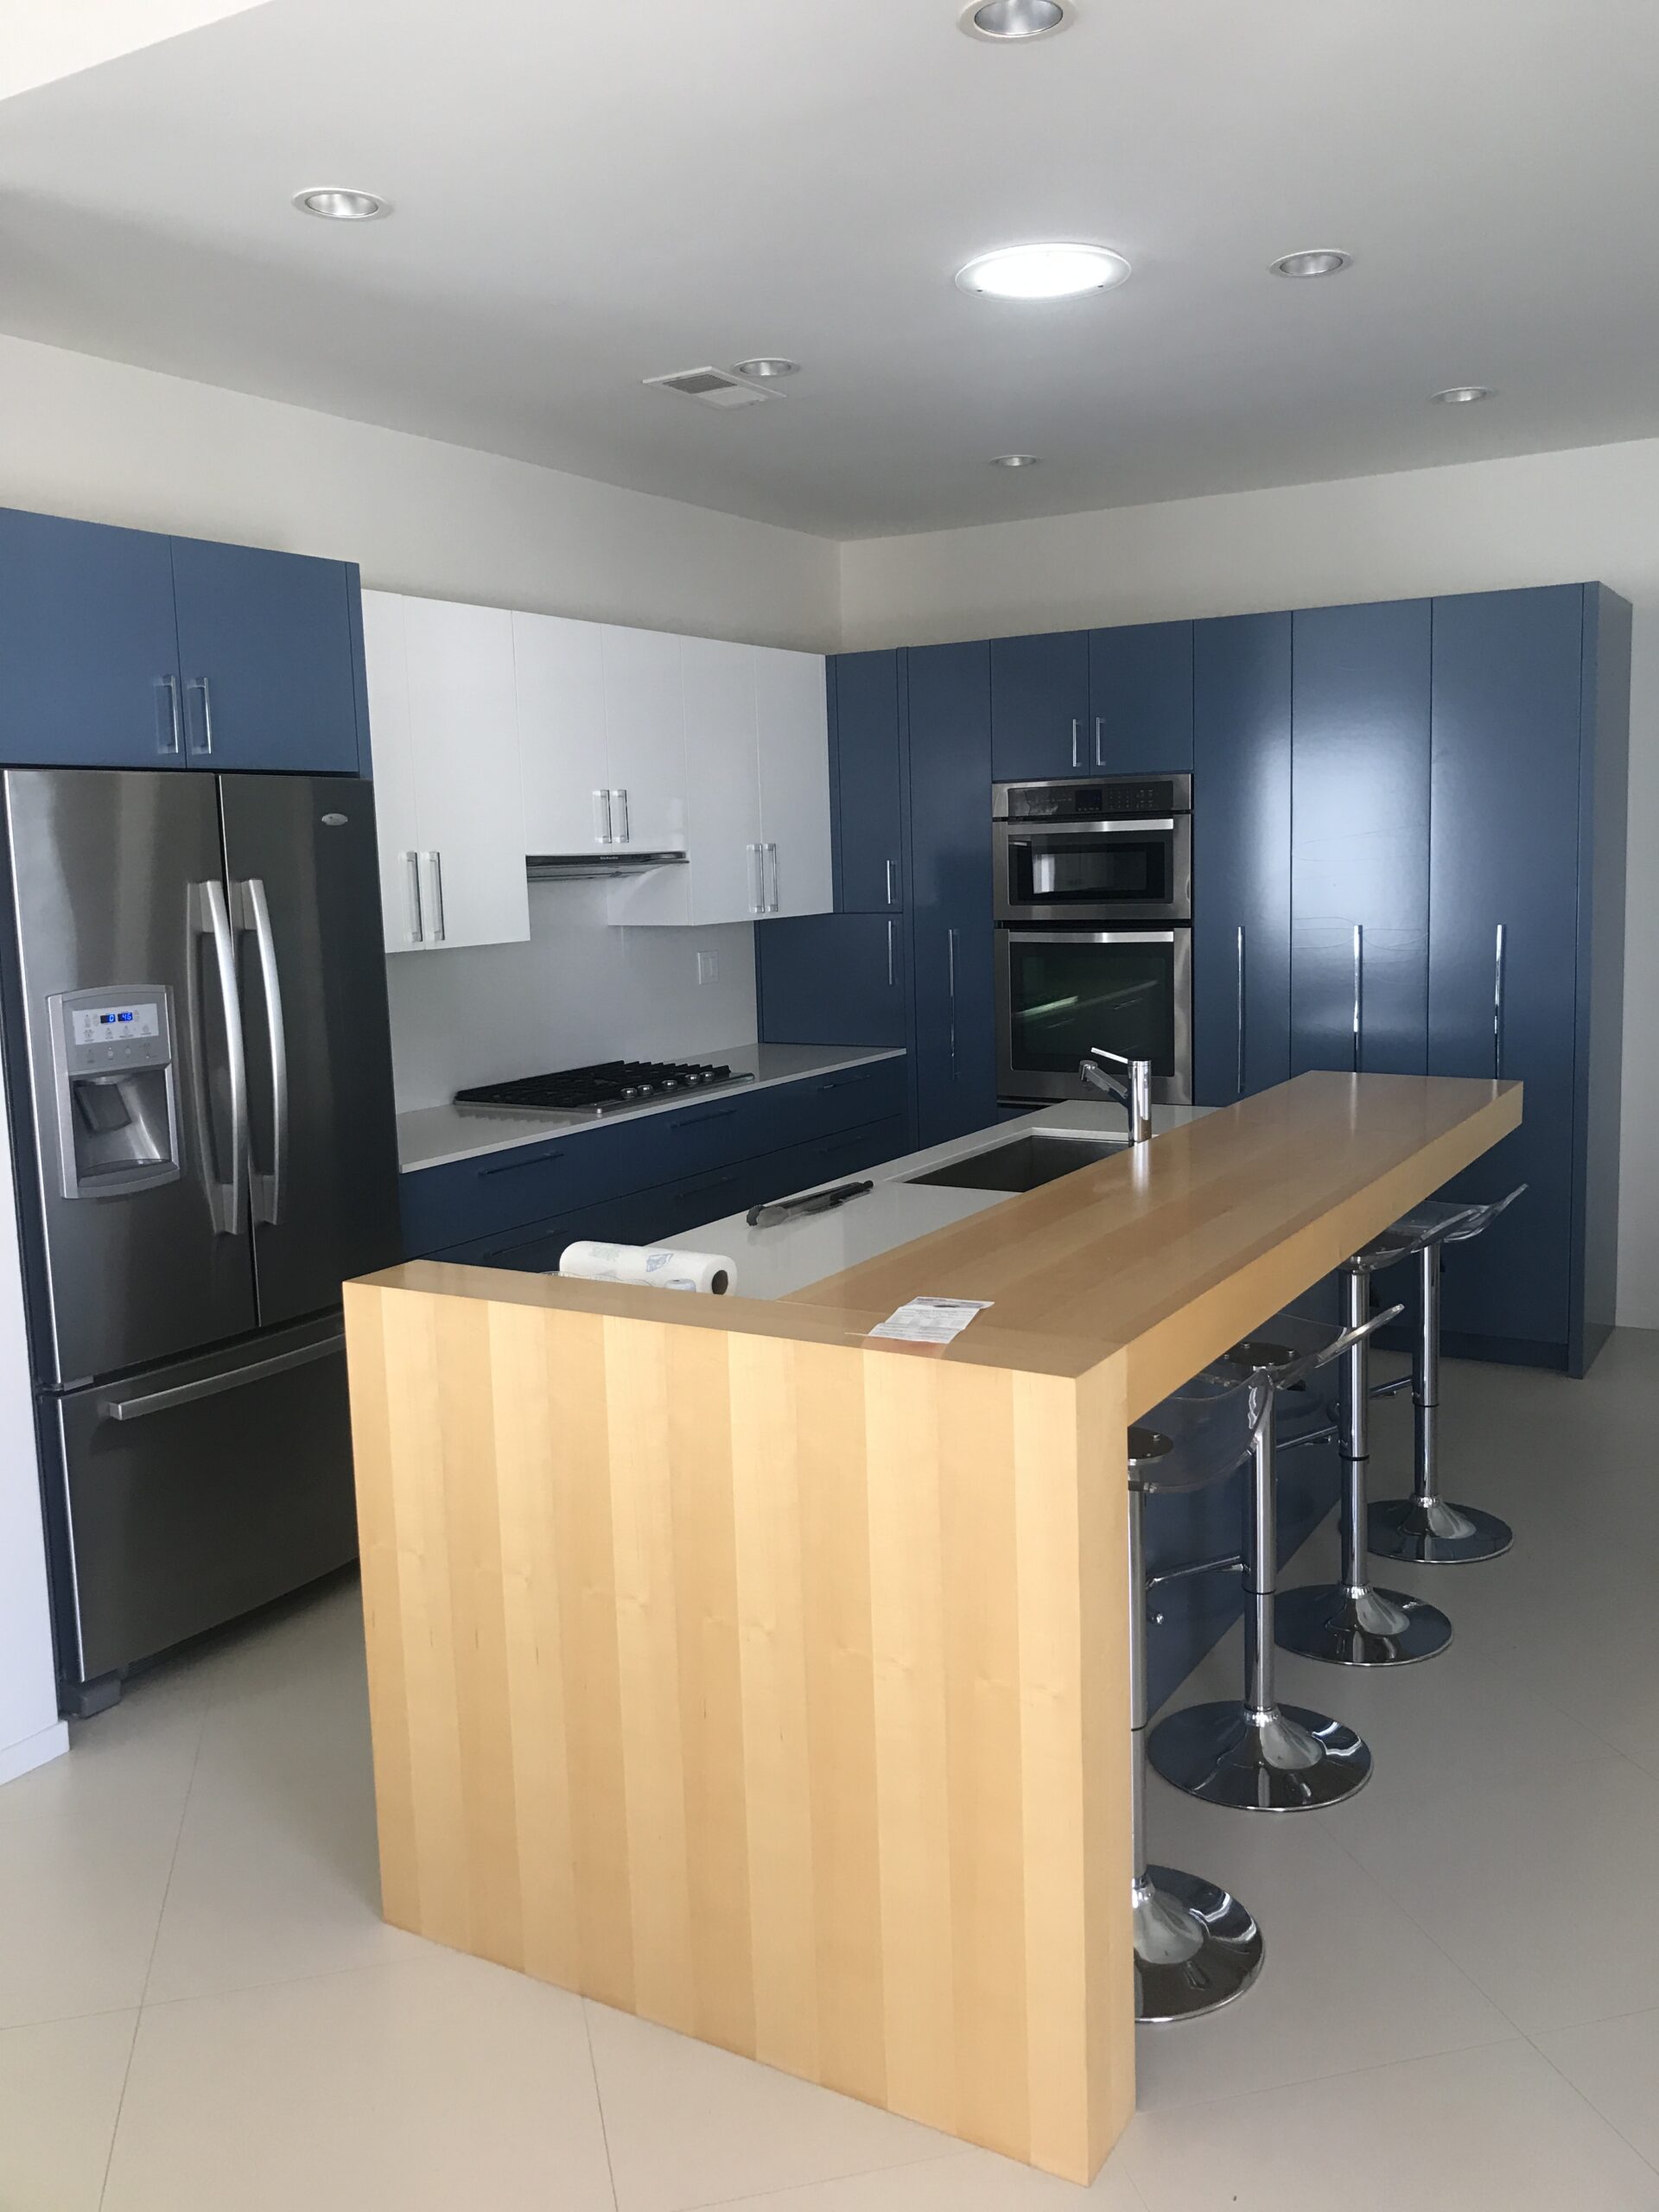 A picture of a kitchen with slightly dark blue appliances and a wooden table